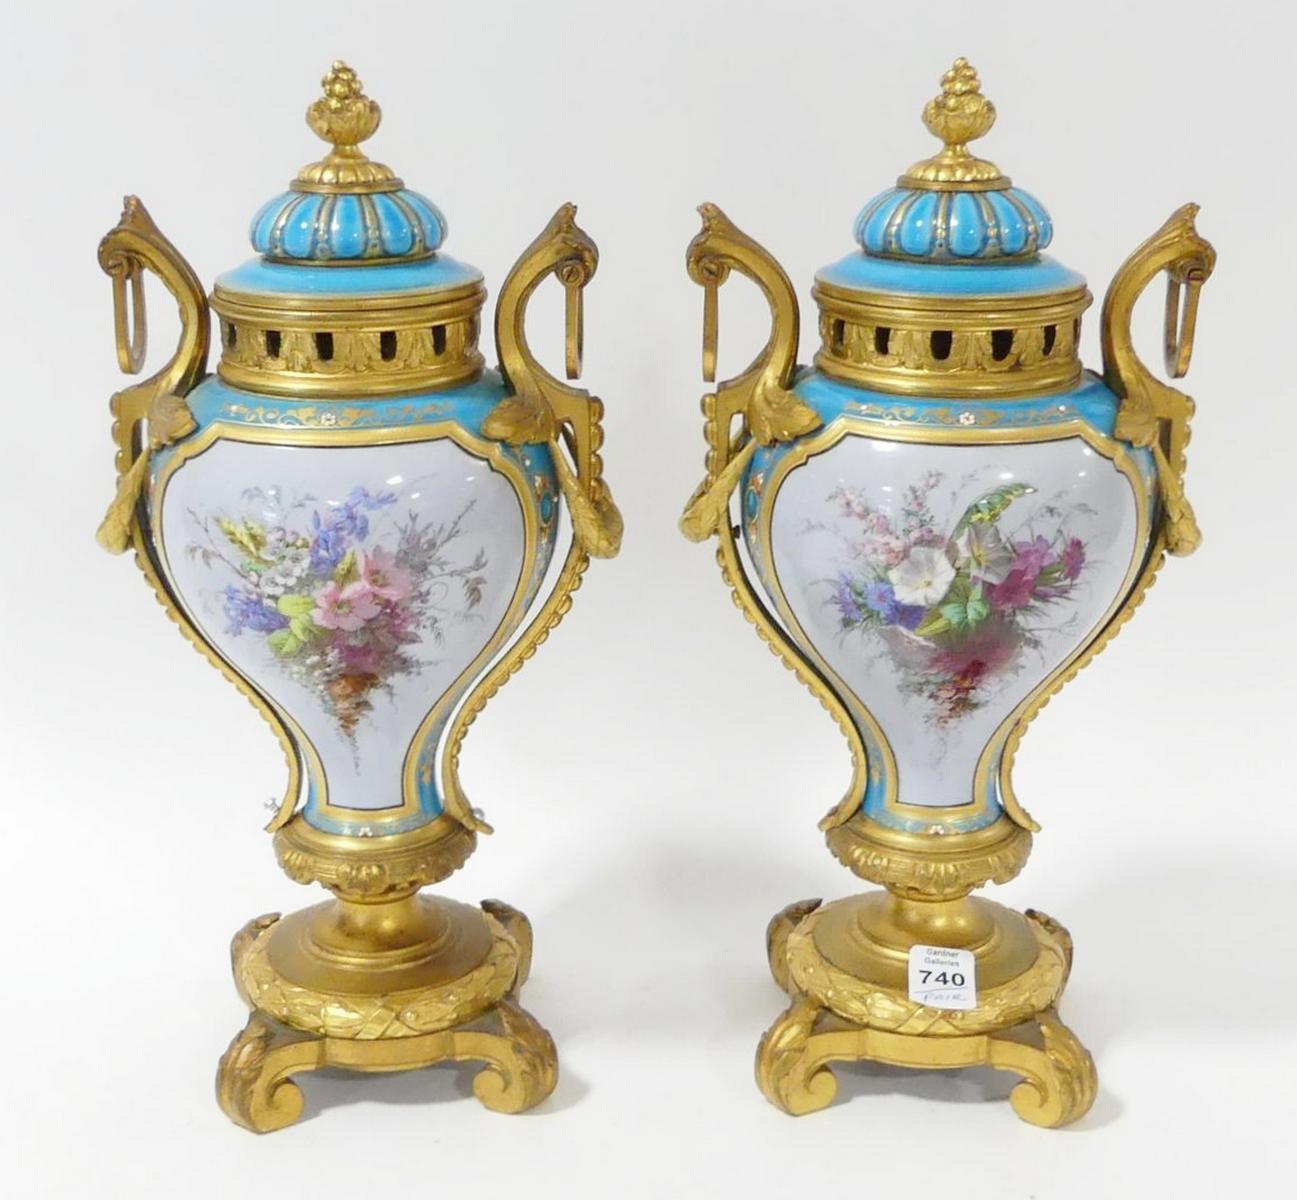 PAIR OF SEVRES URNS